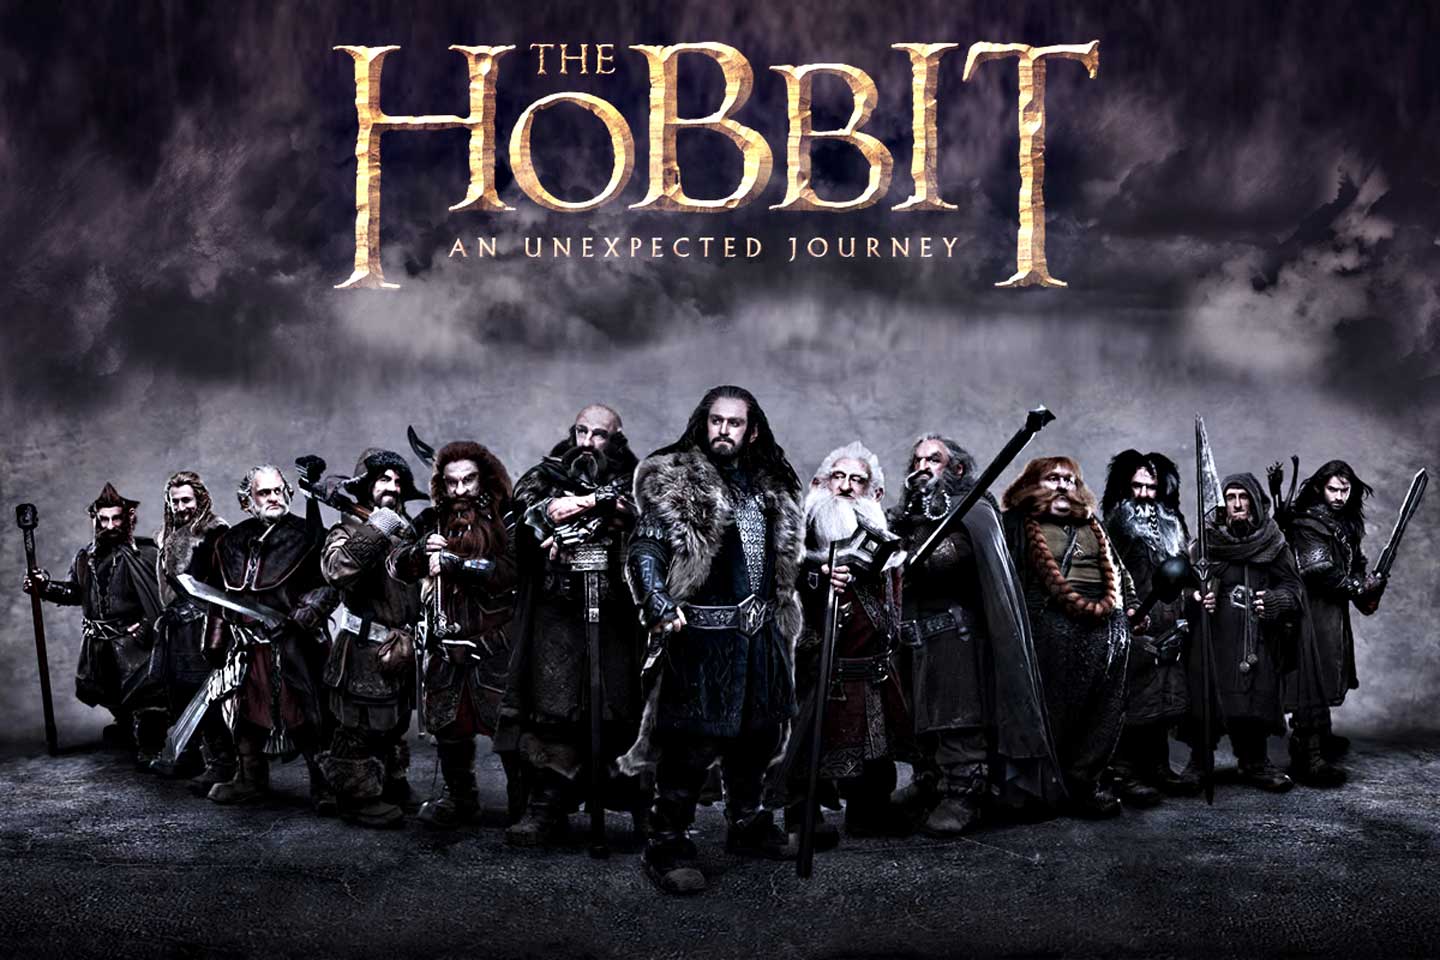 Movie poster for the hobbit